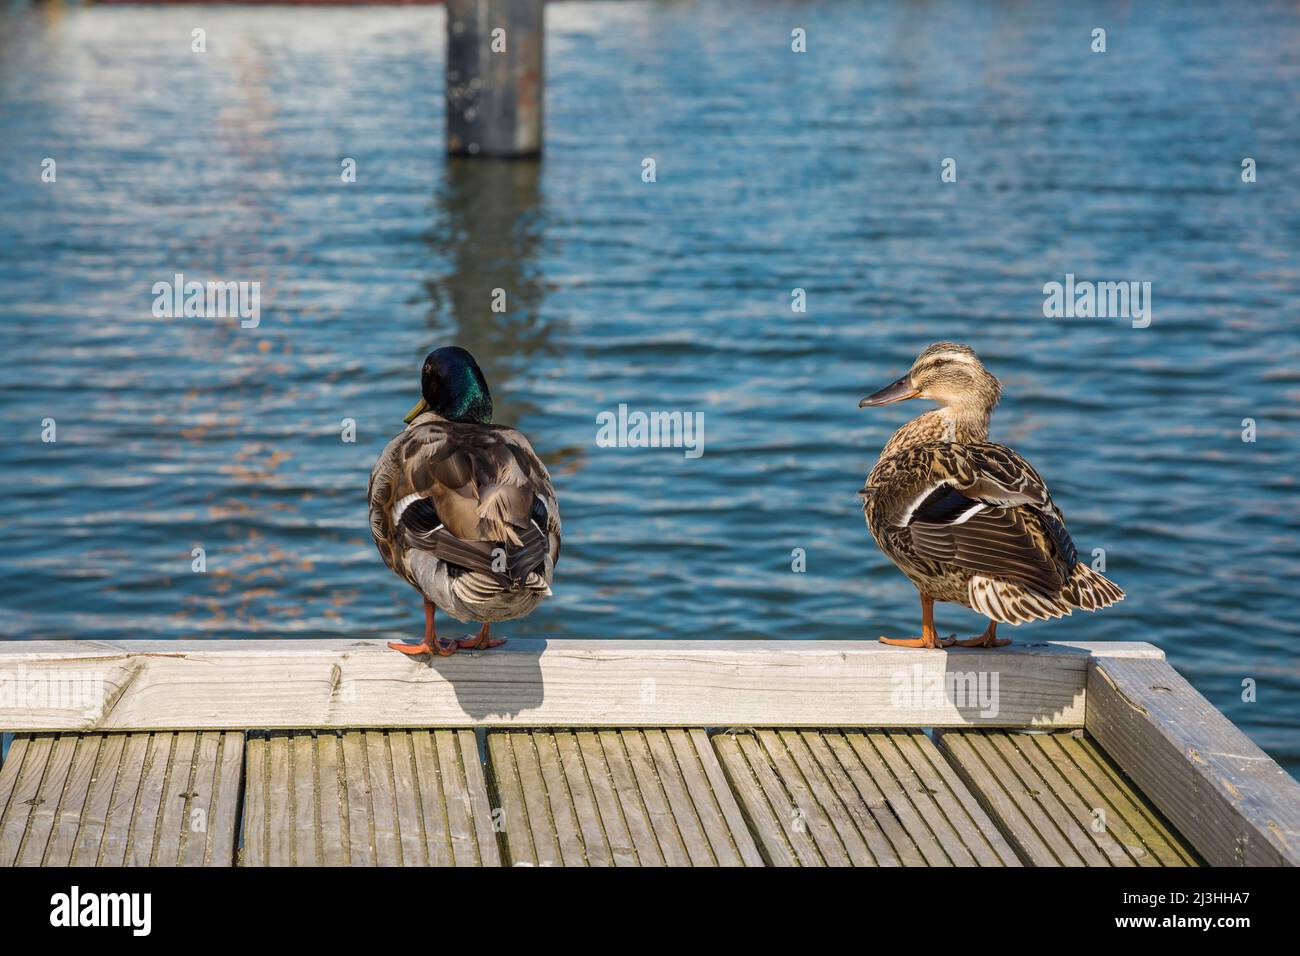 Two ducks on a wooden dock at the harbor Stock Photo